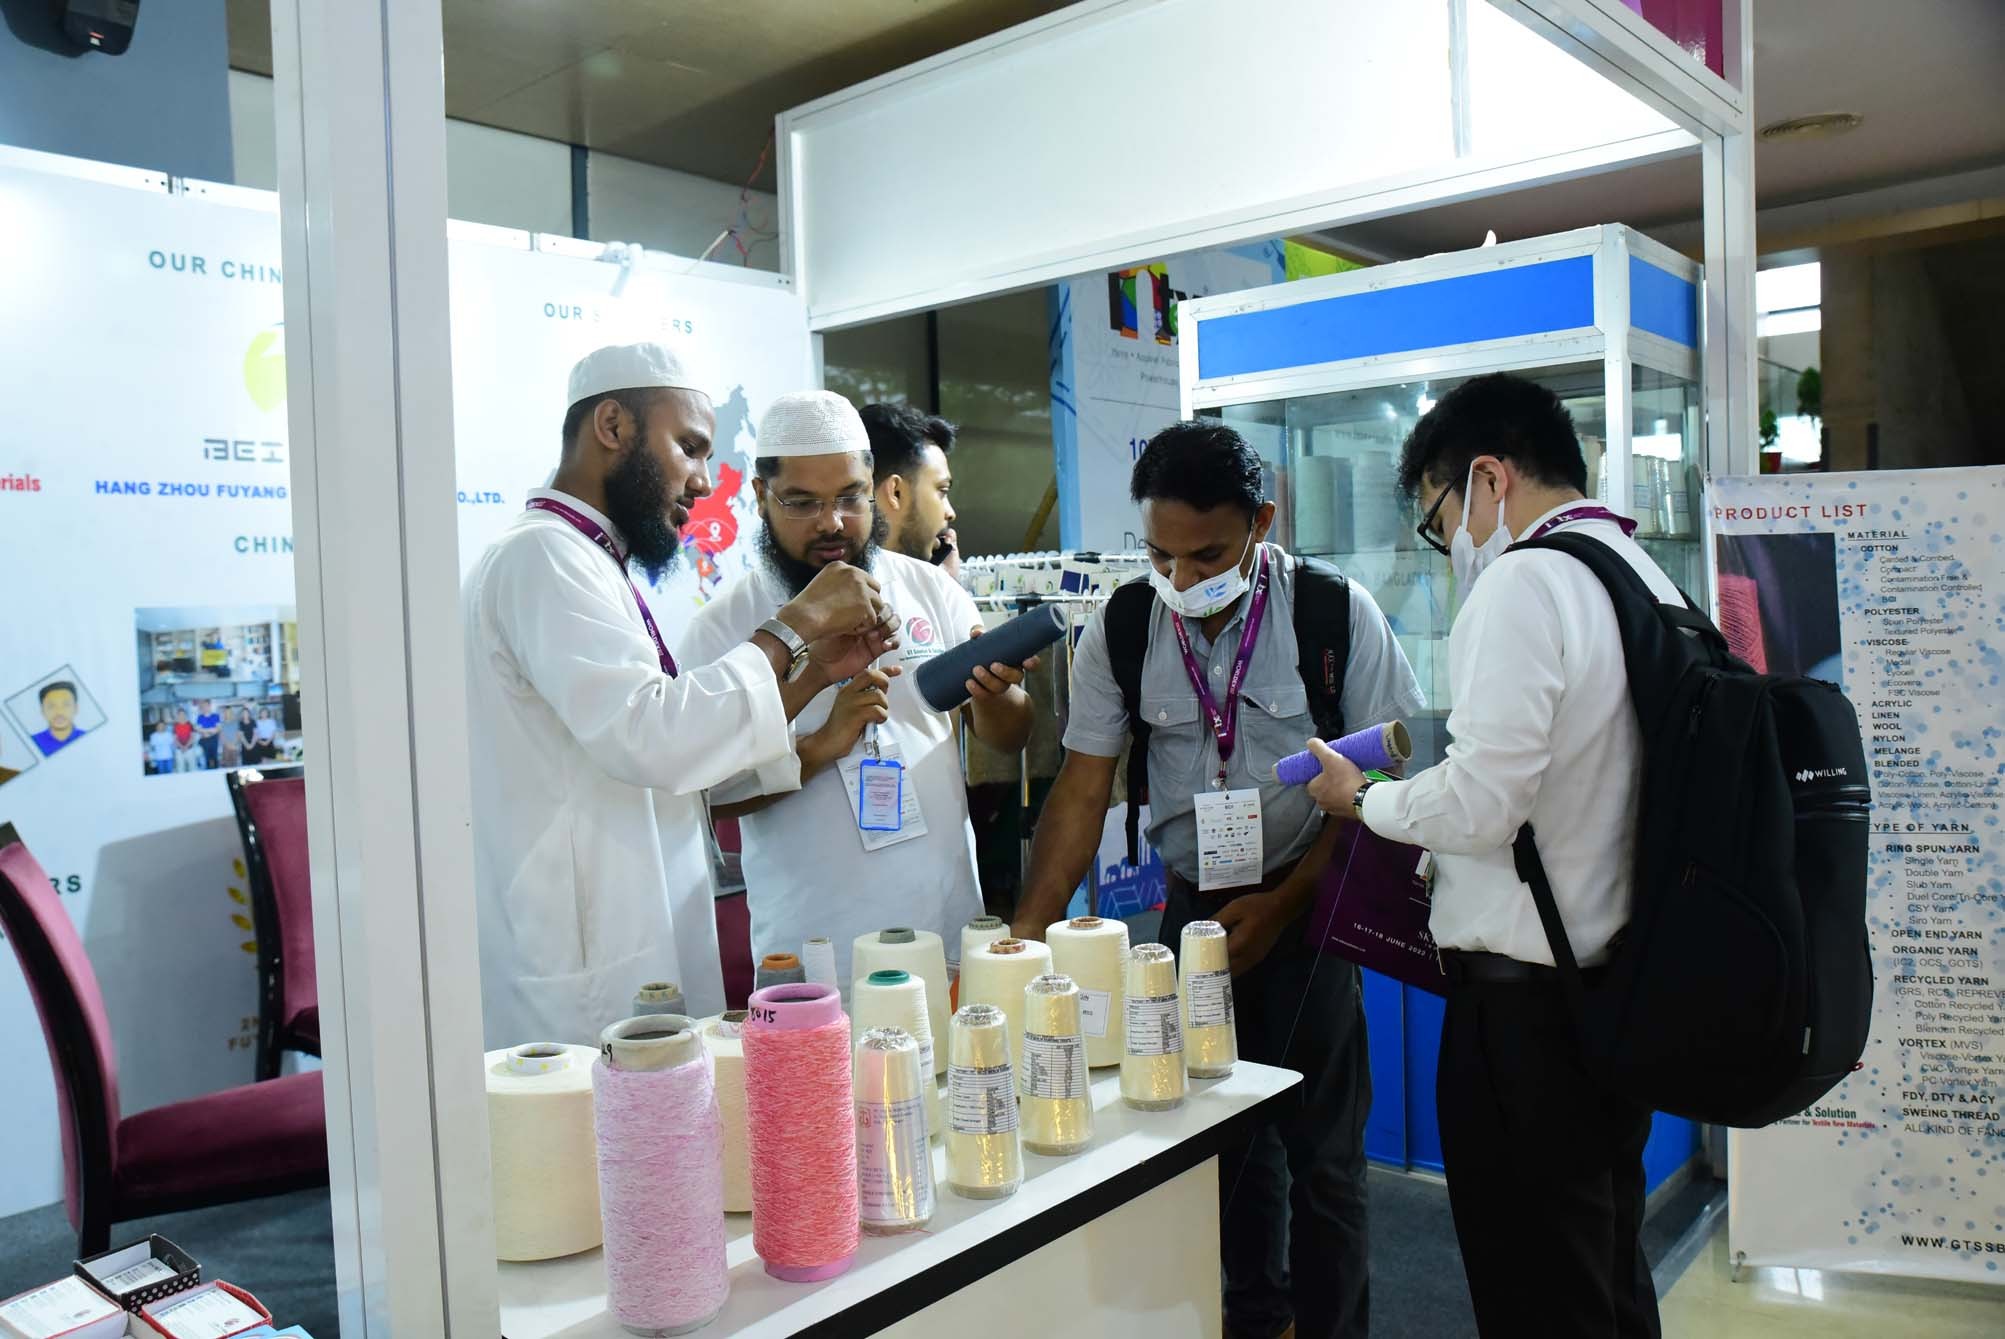 9th Intex South Asia - Bangladesh Edition in physical format  concludes with resounding success!